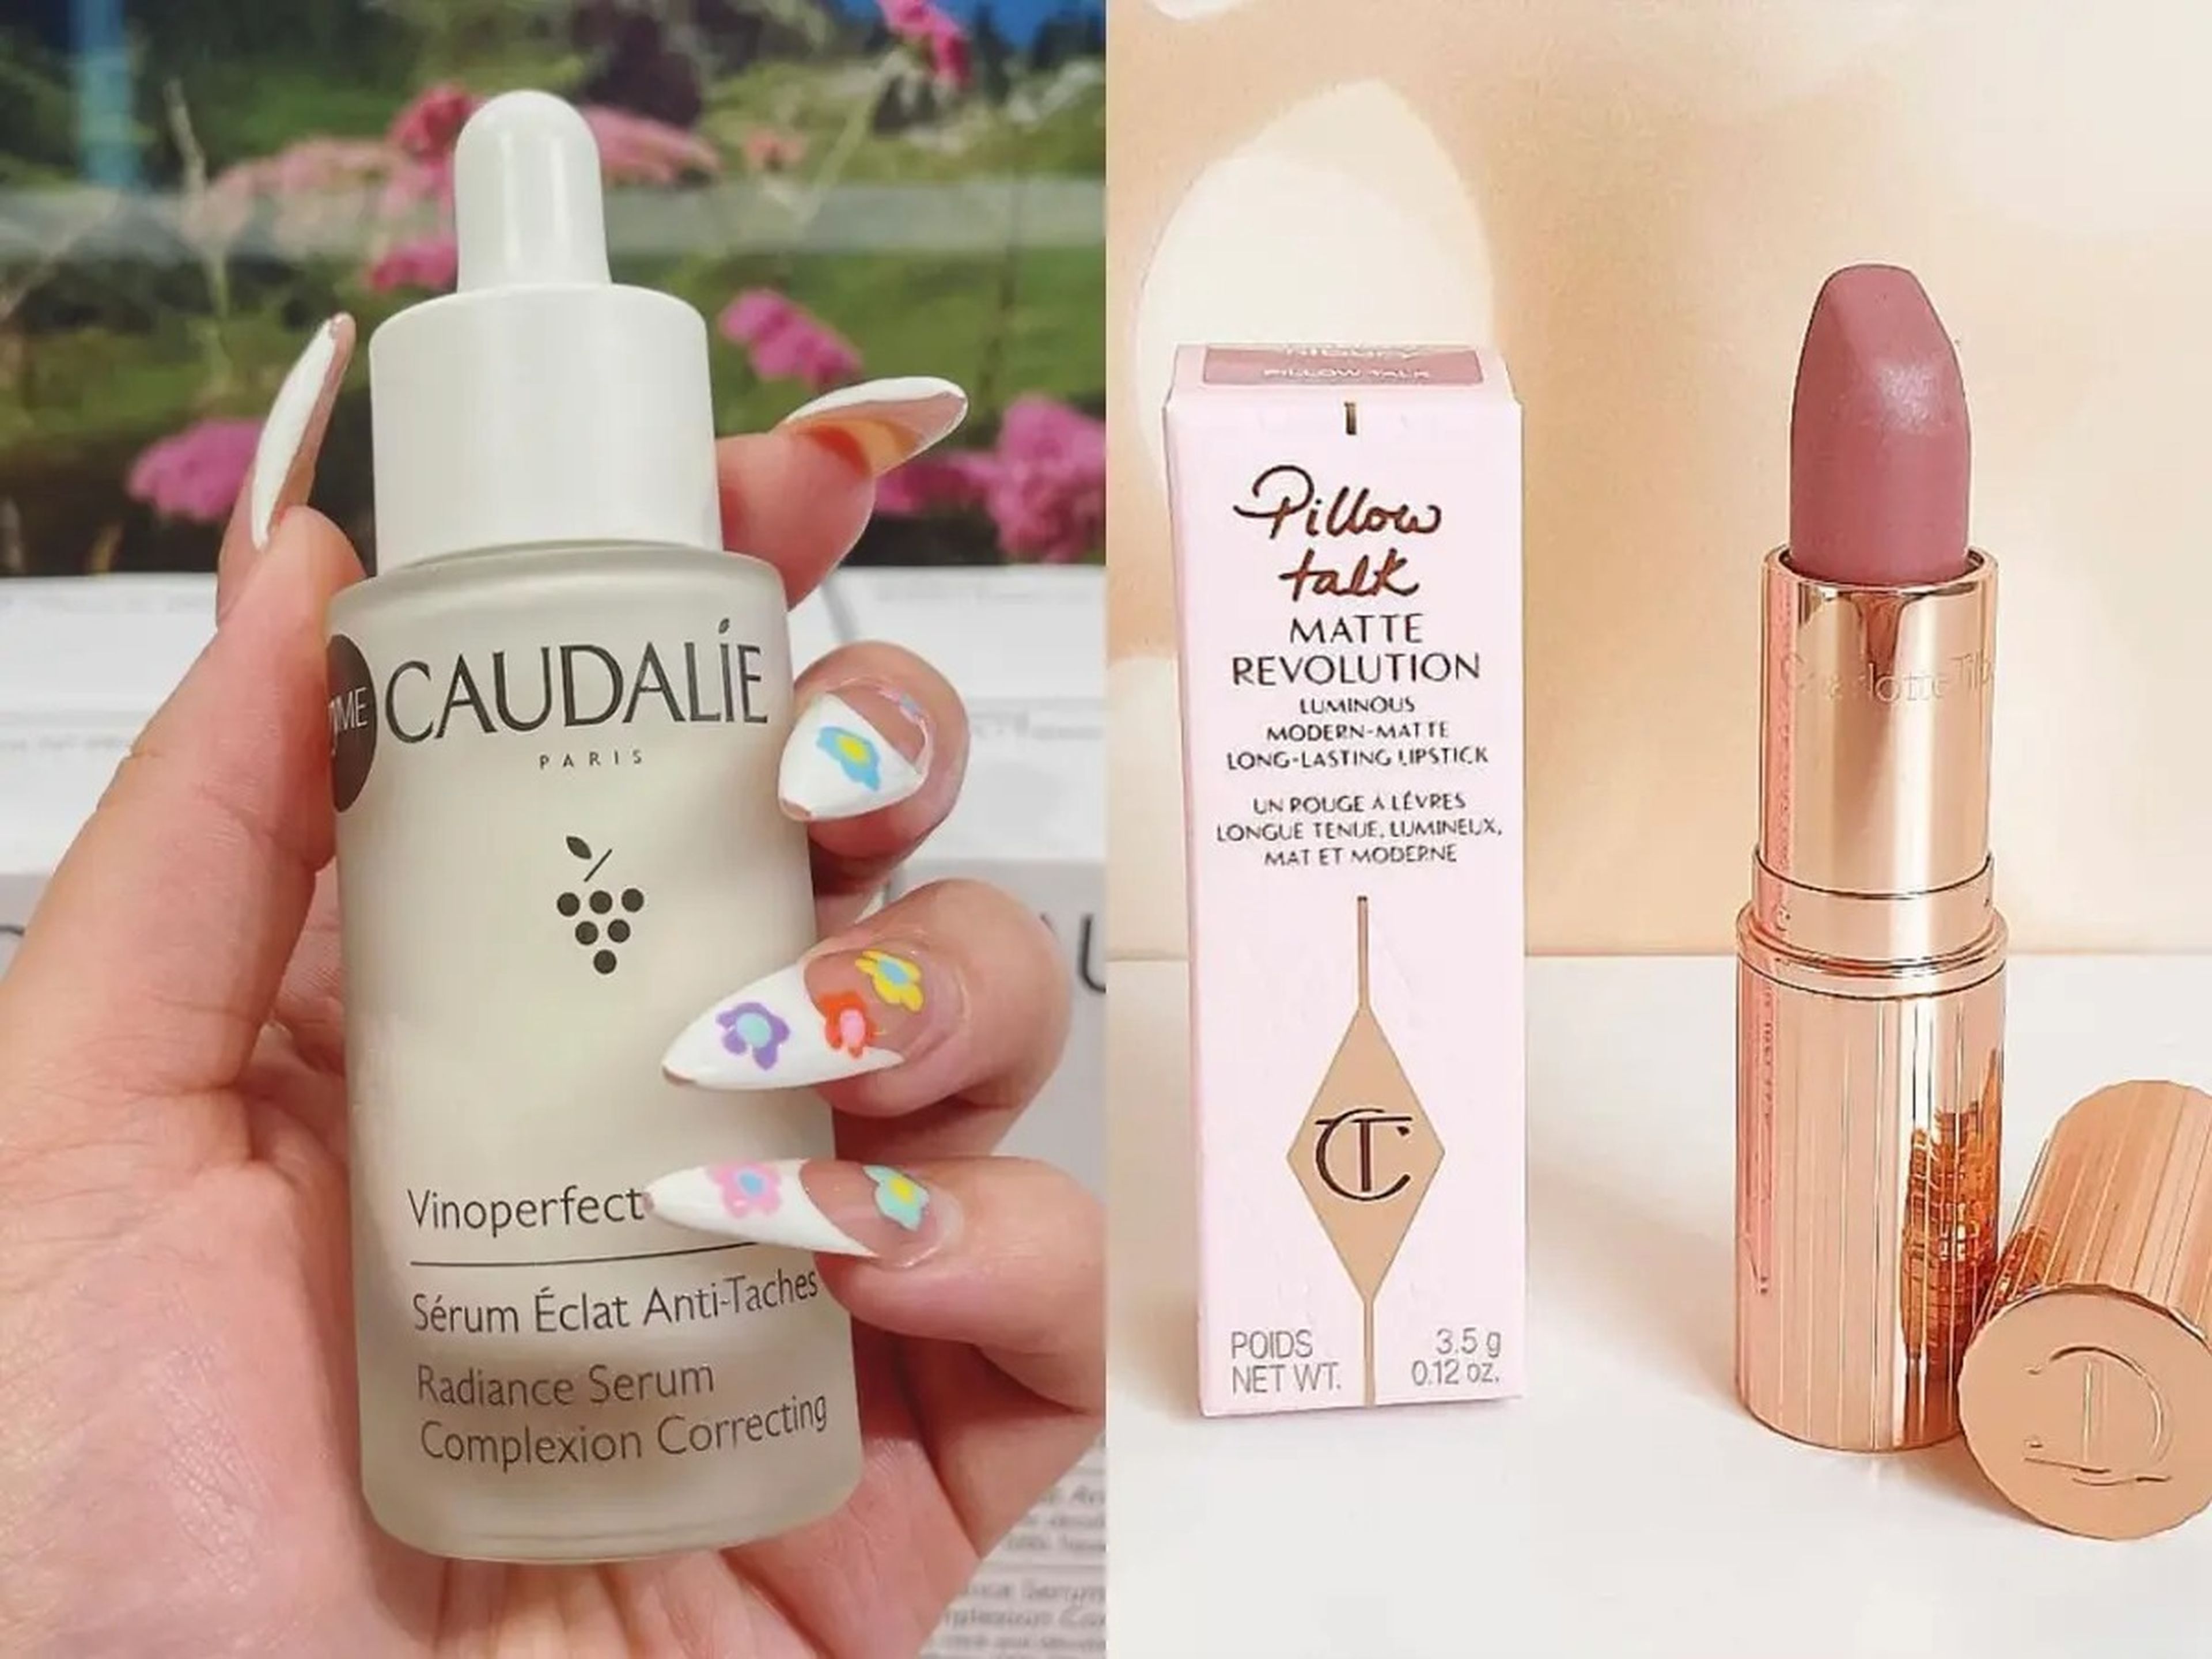 The writer holds a white glass dropper serum in front of Caudalie boxes and plant; A mauve lipstick in a gold tube with cap next to it sits by a pink box with "Pillow Talk" text and Charlotte Tilbury logo in front of Champagne-colored backdrop